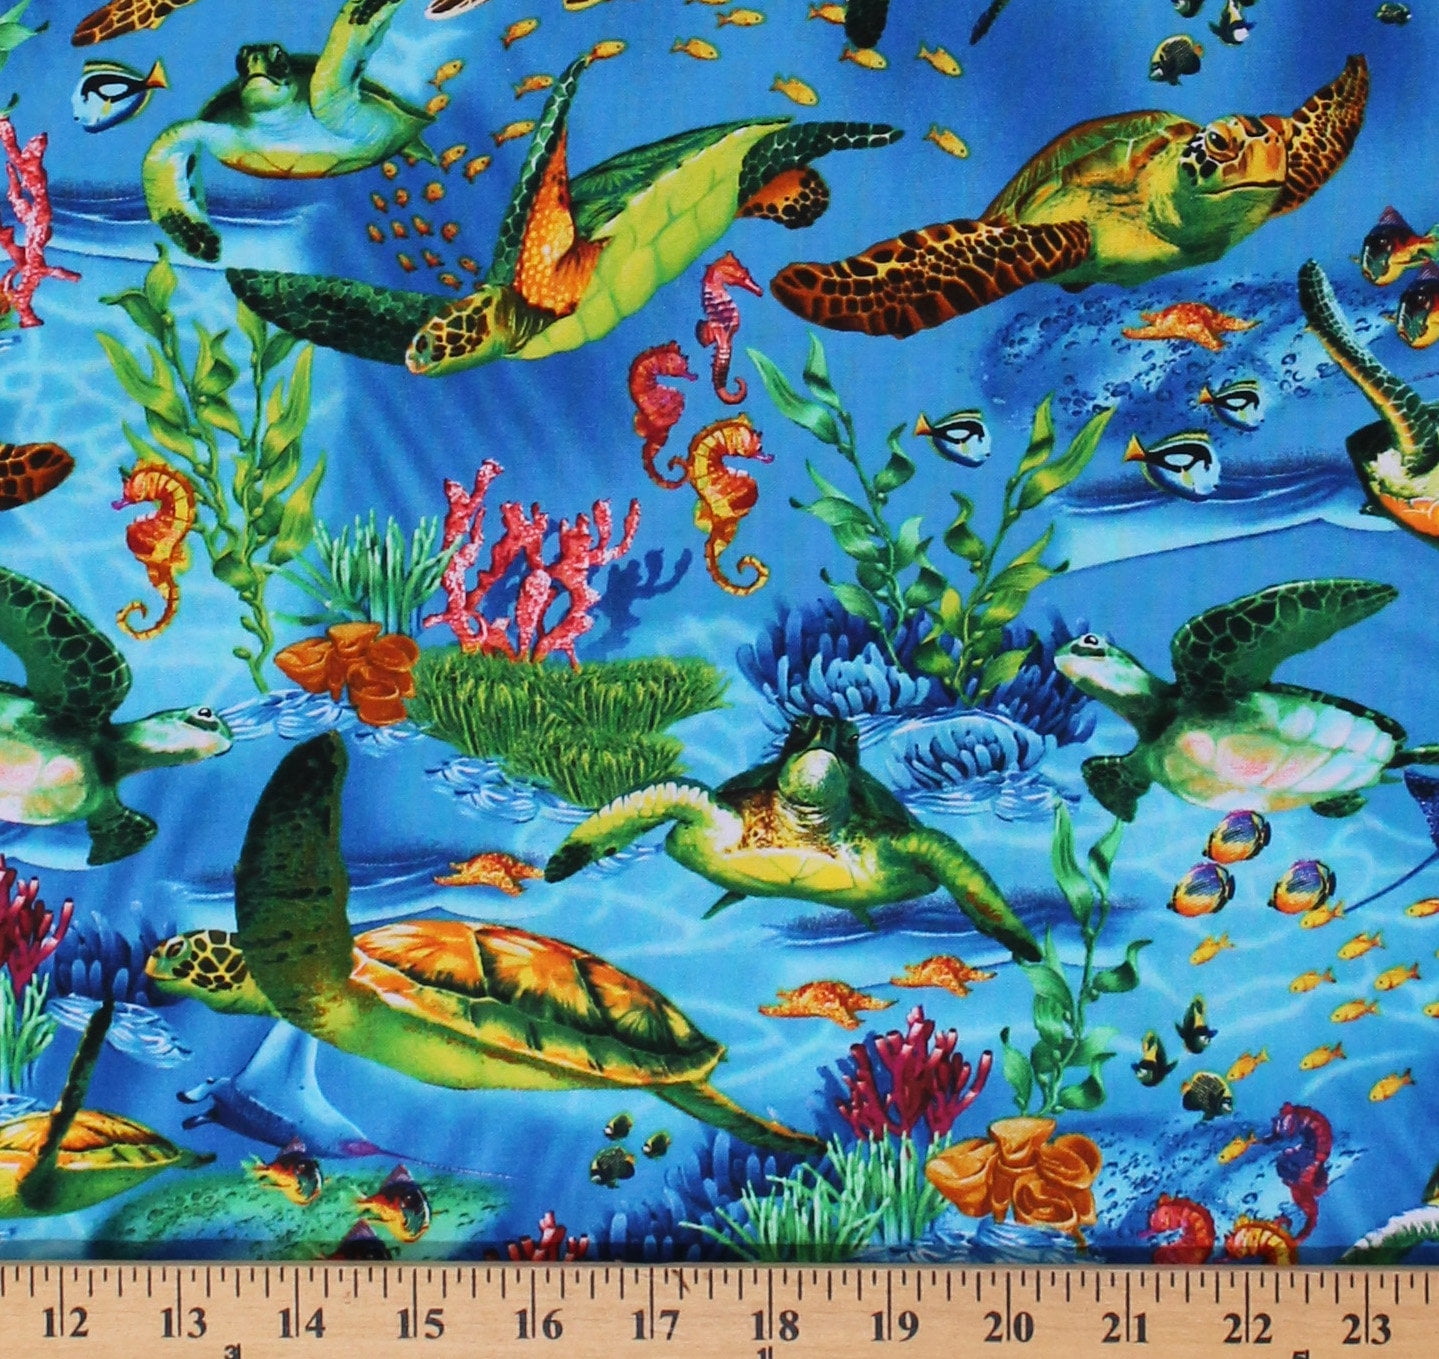 CORAL REEF OCEAN SEA LIFE COLORFUL BLUES COTTON FABRIC BTHY 